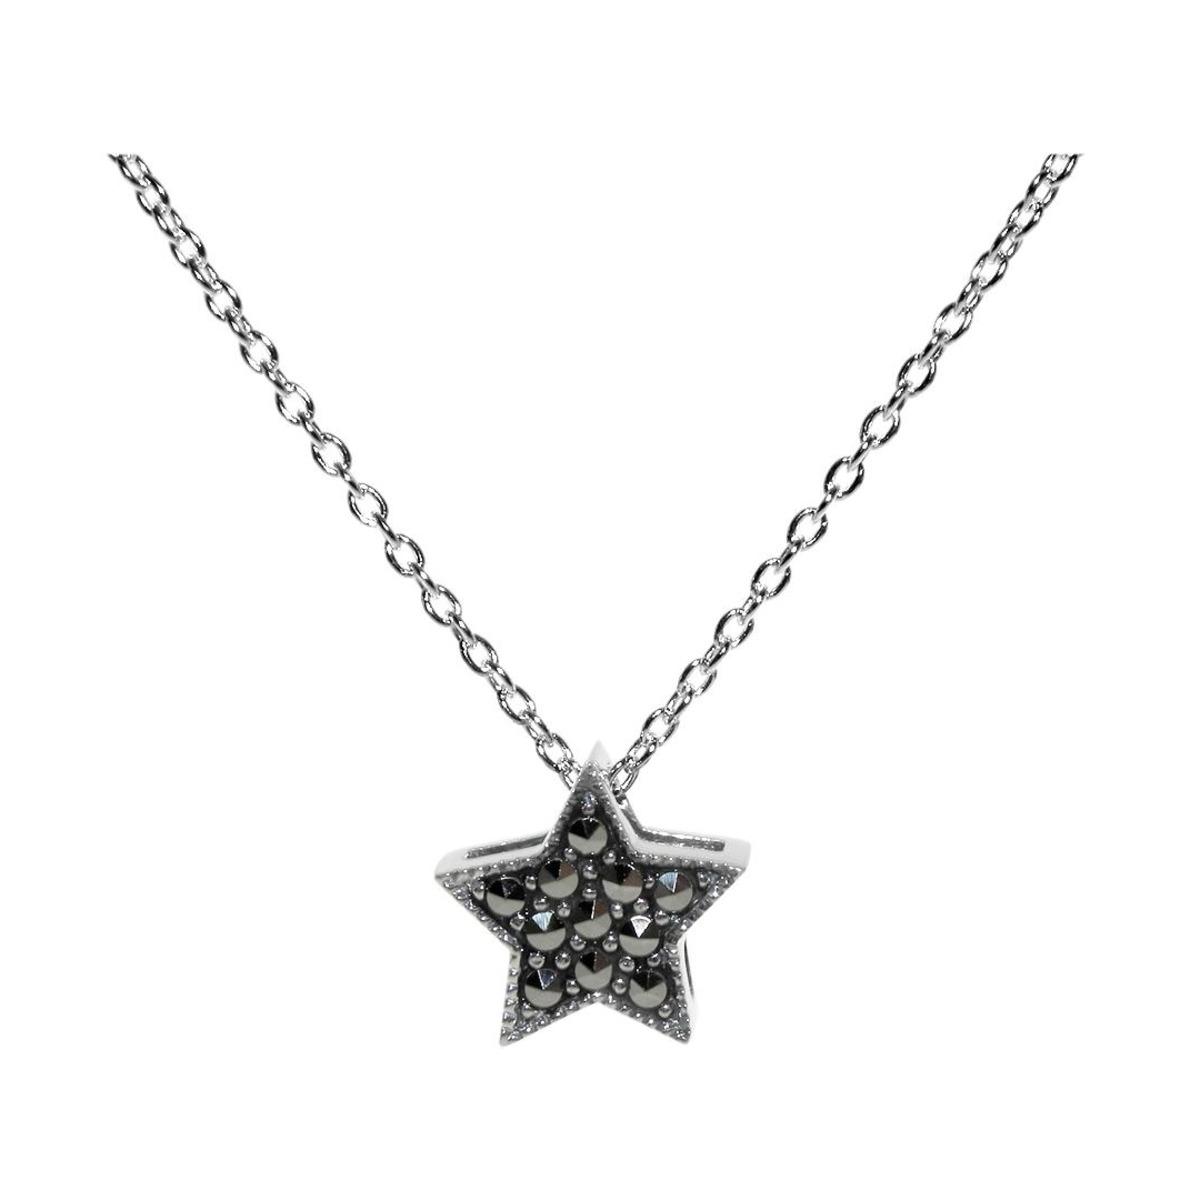 Silver & Marcasite Star Necklace